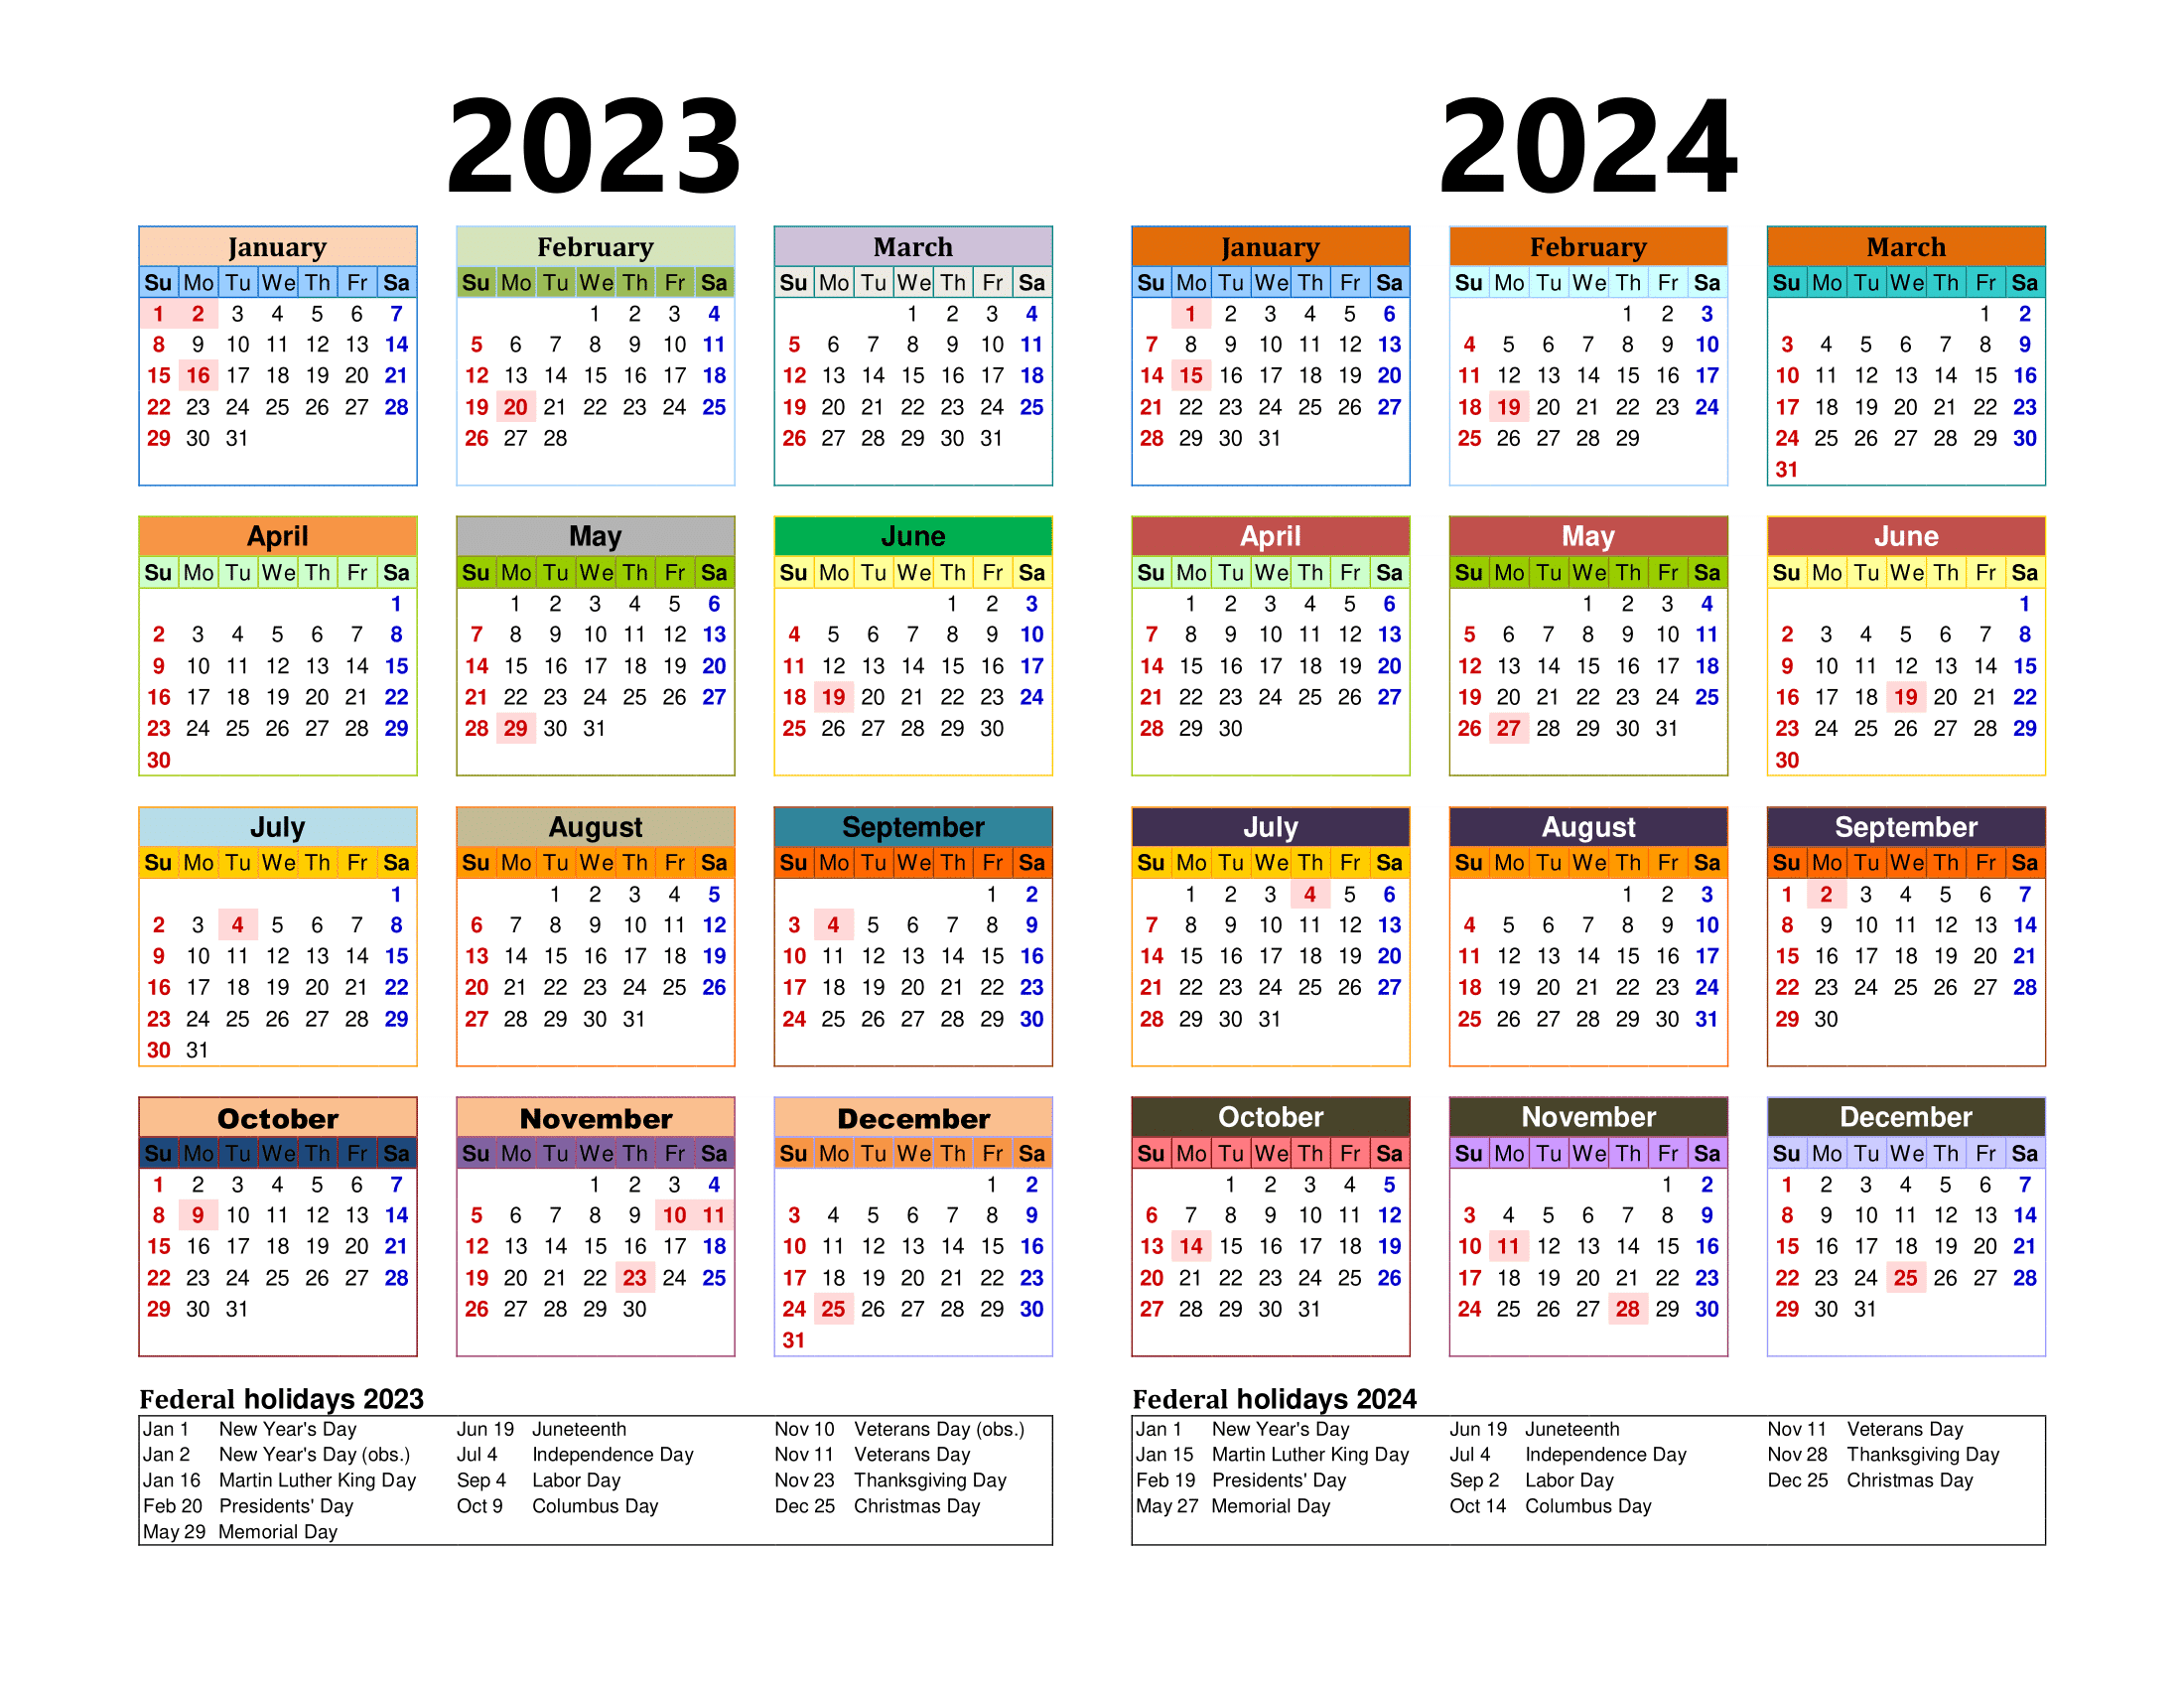 Free Printable Two Year Calendar Templates For 2023 And 2024 In Pdf for Printable Calendar For 2023 And 2024